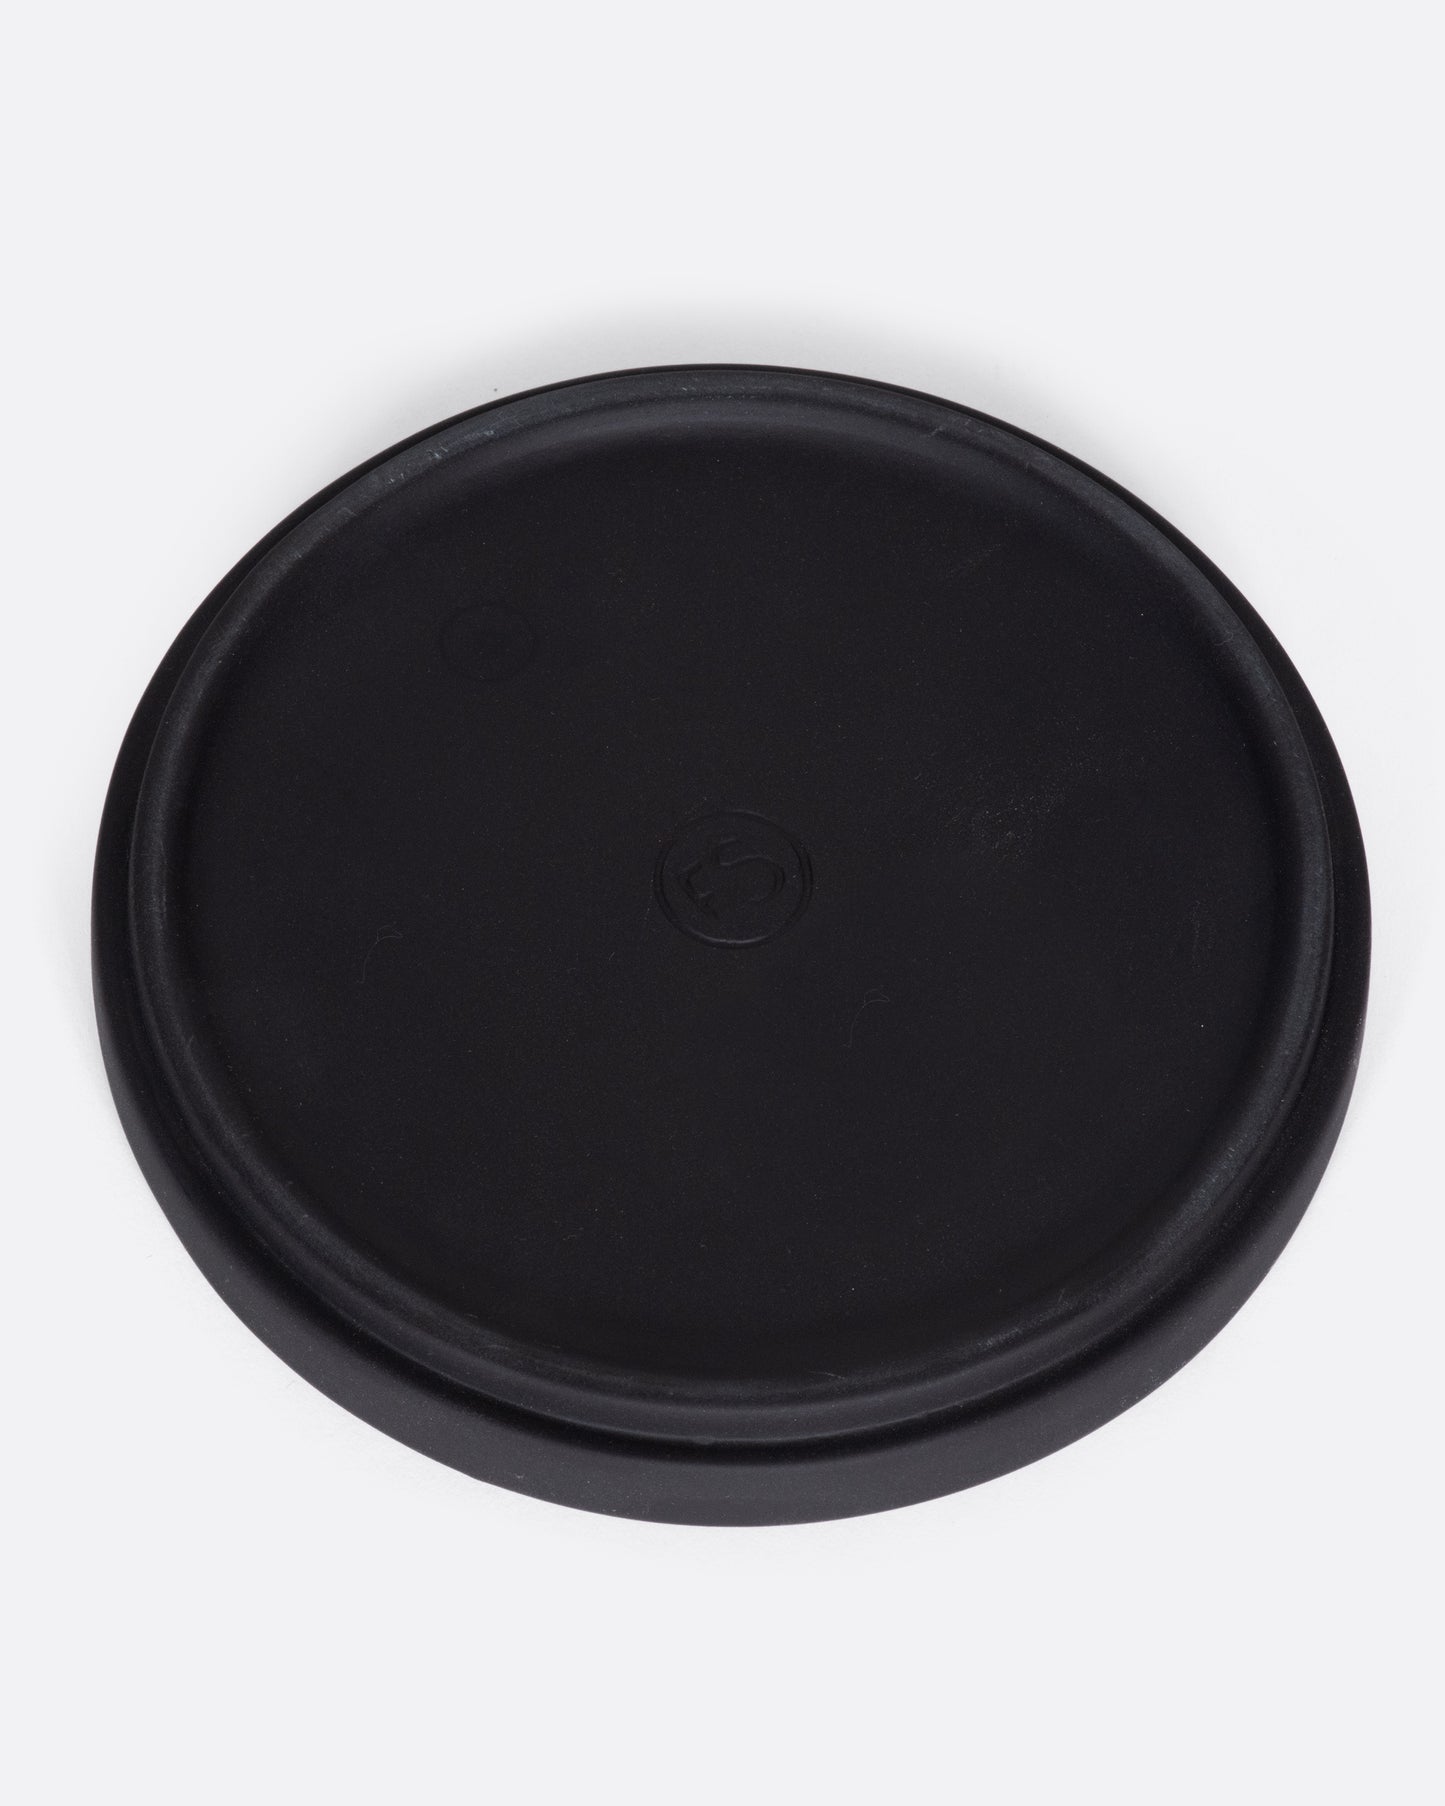 This black ceramic plate with a raised lip and matte black finish looks beautiful with tall candles and works great for small plants, too.